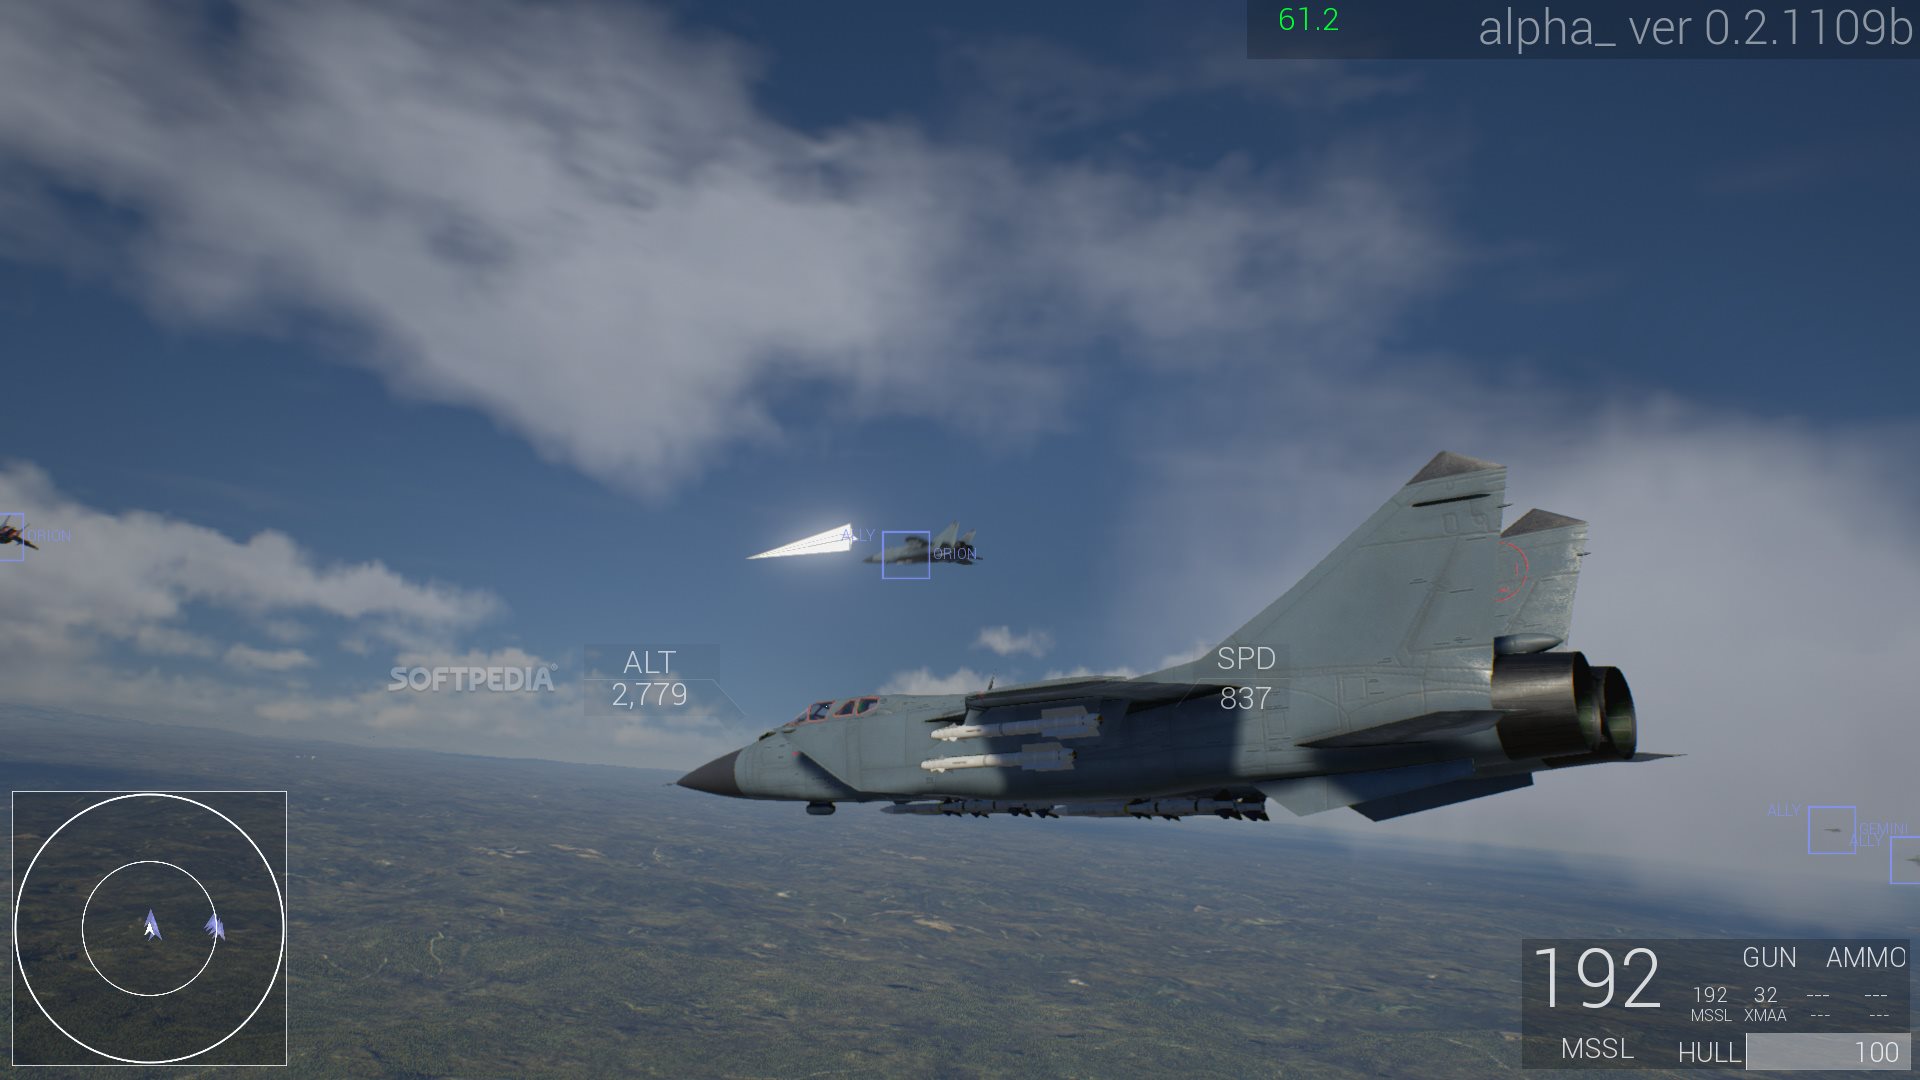 project wingman game download